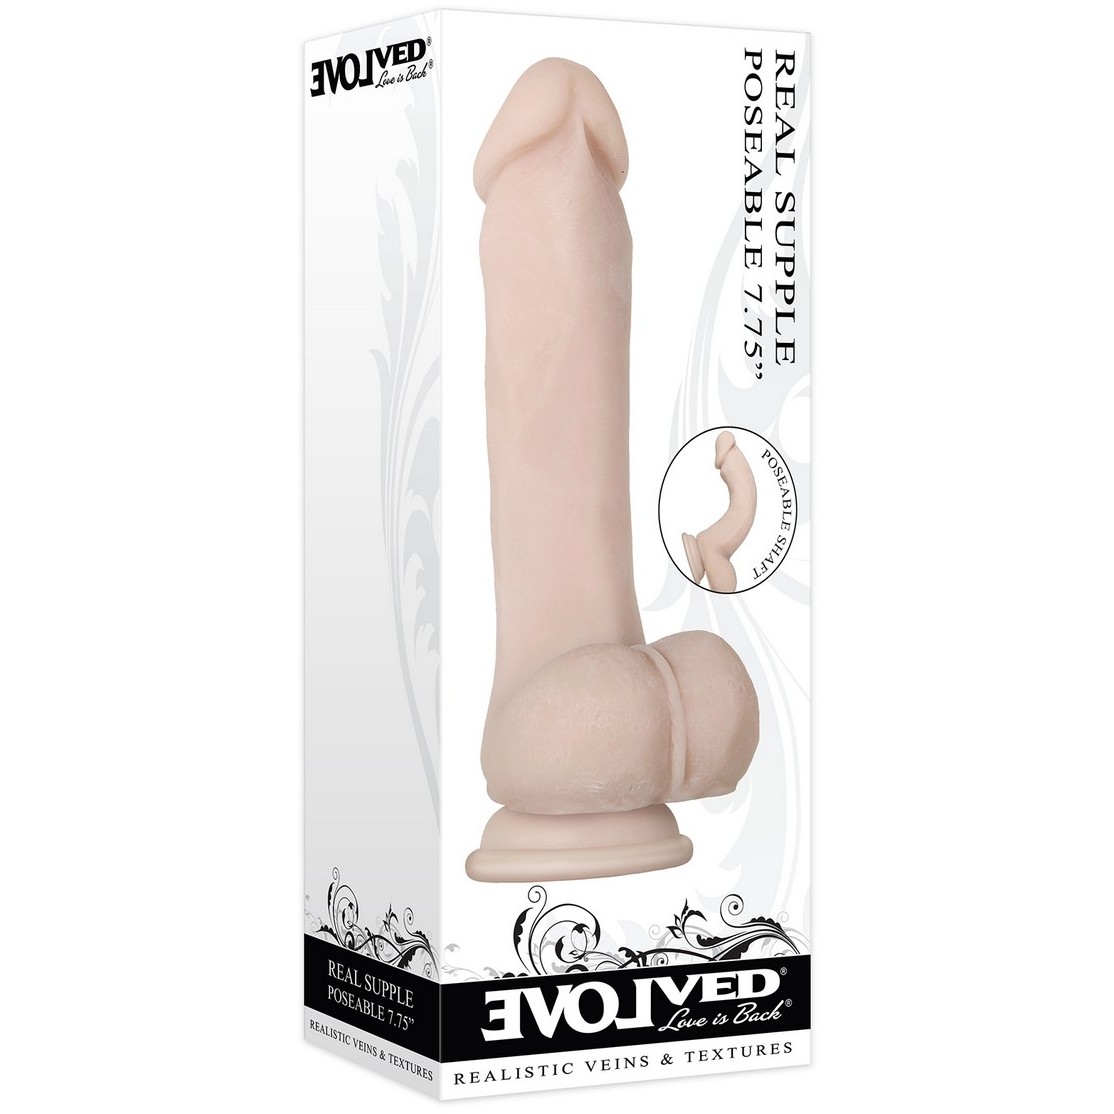 Evolved  Real Supple Poseable  , 19.6 